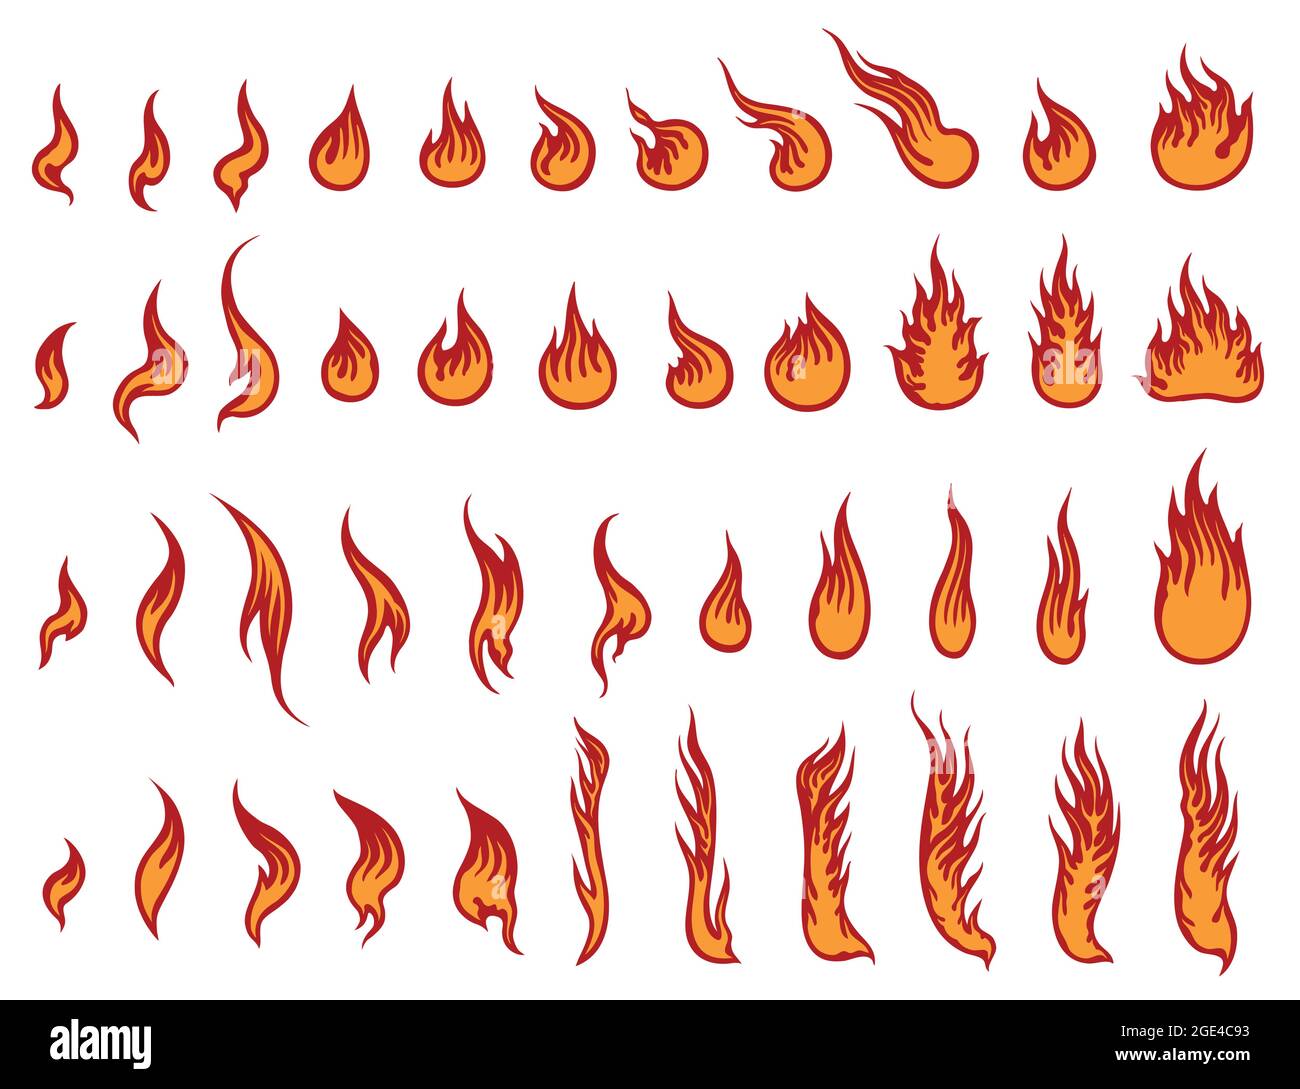 Anime fire illustration.Fire and flames Stock Illustration